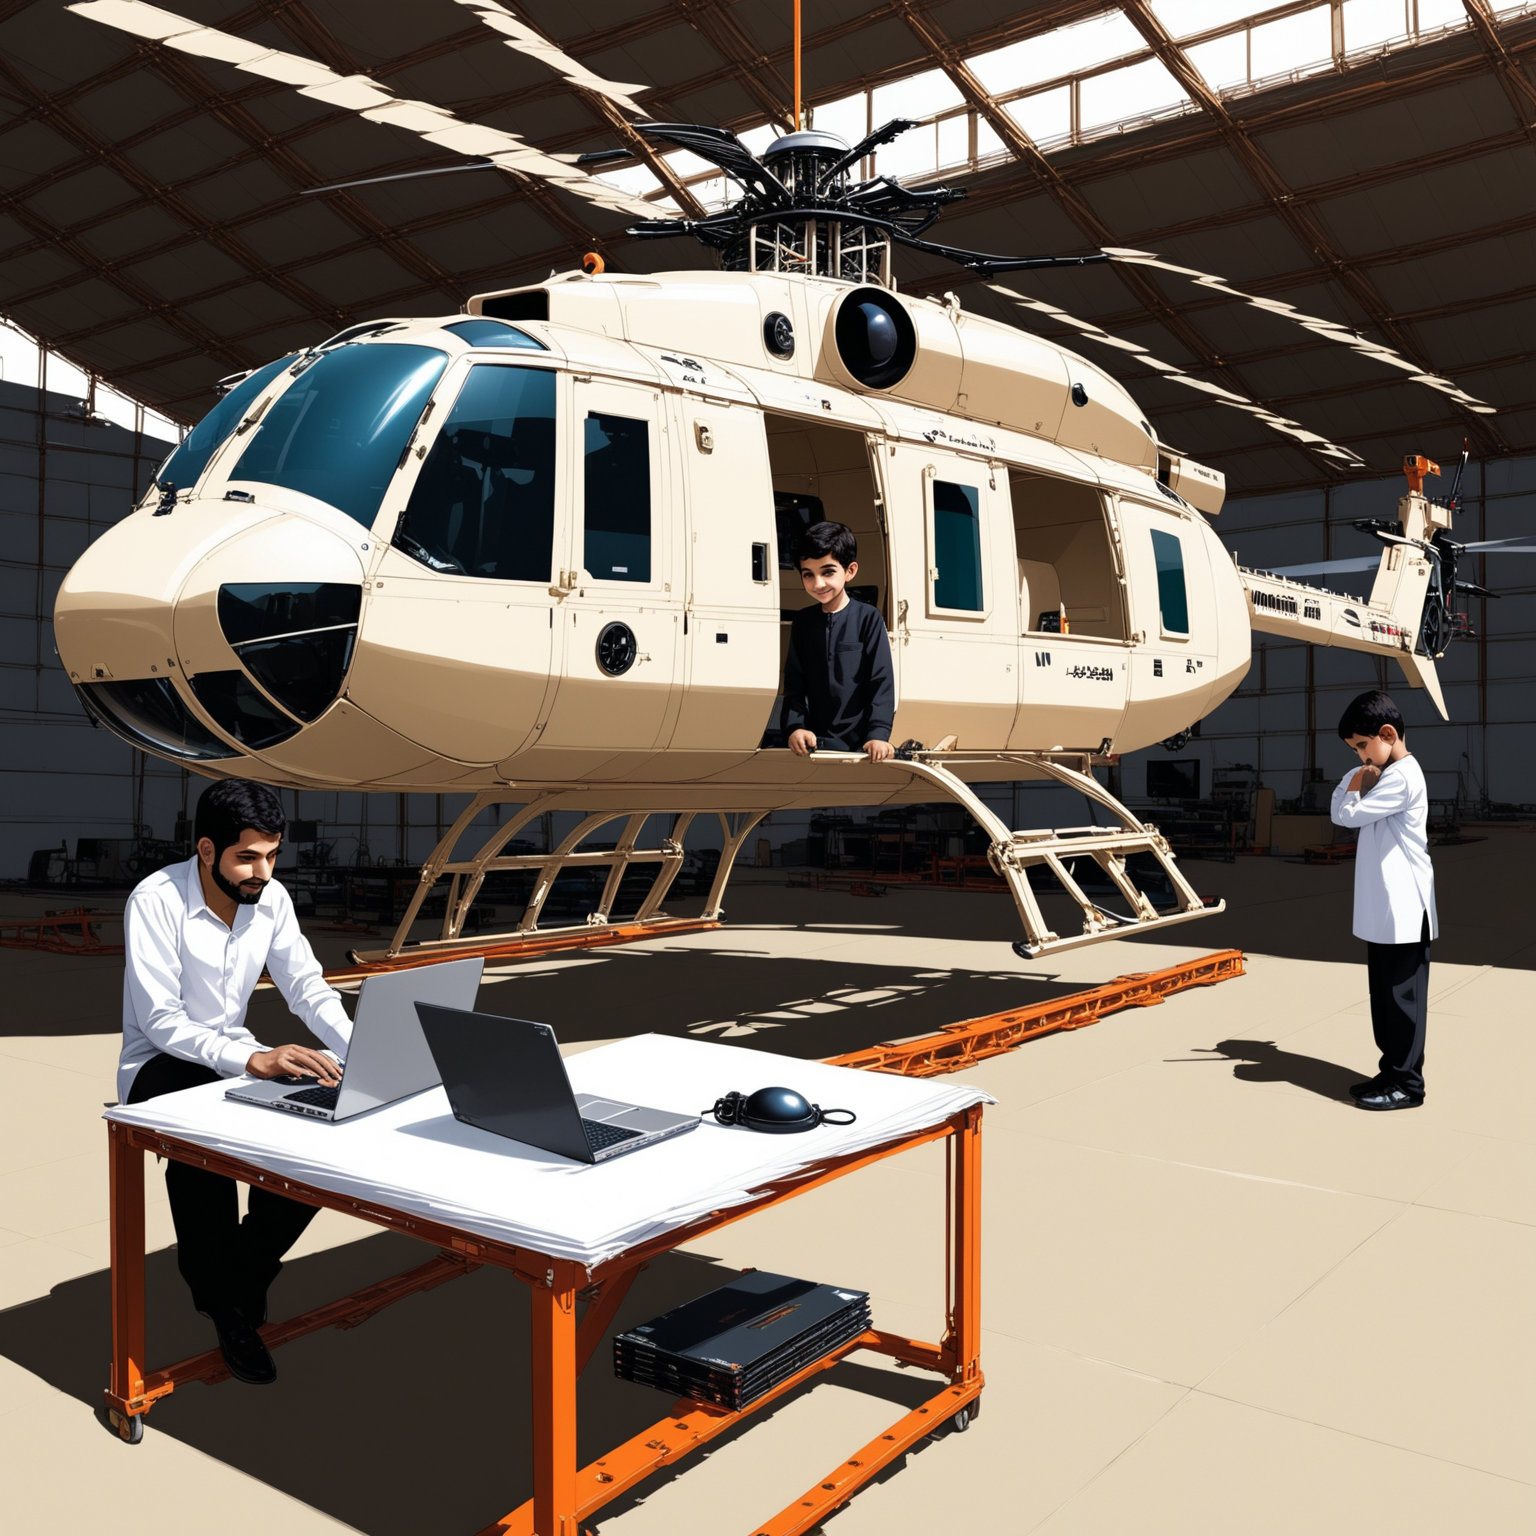 Persian Boys Building HighTech Helicopter in Modern Workshop